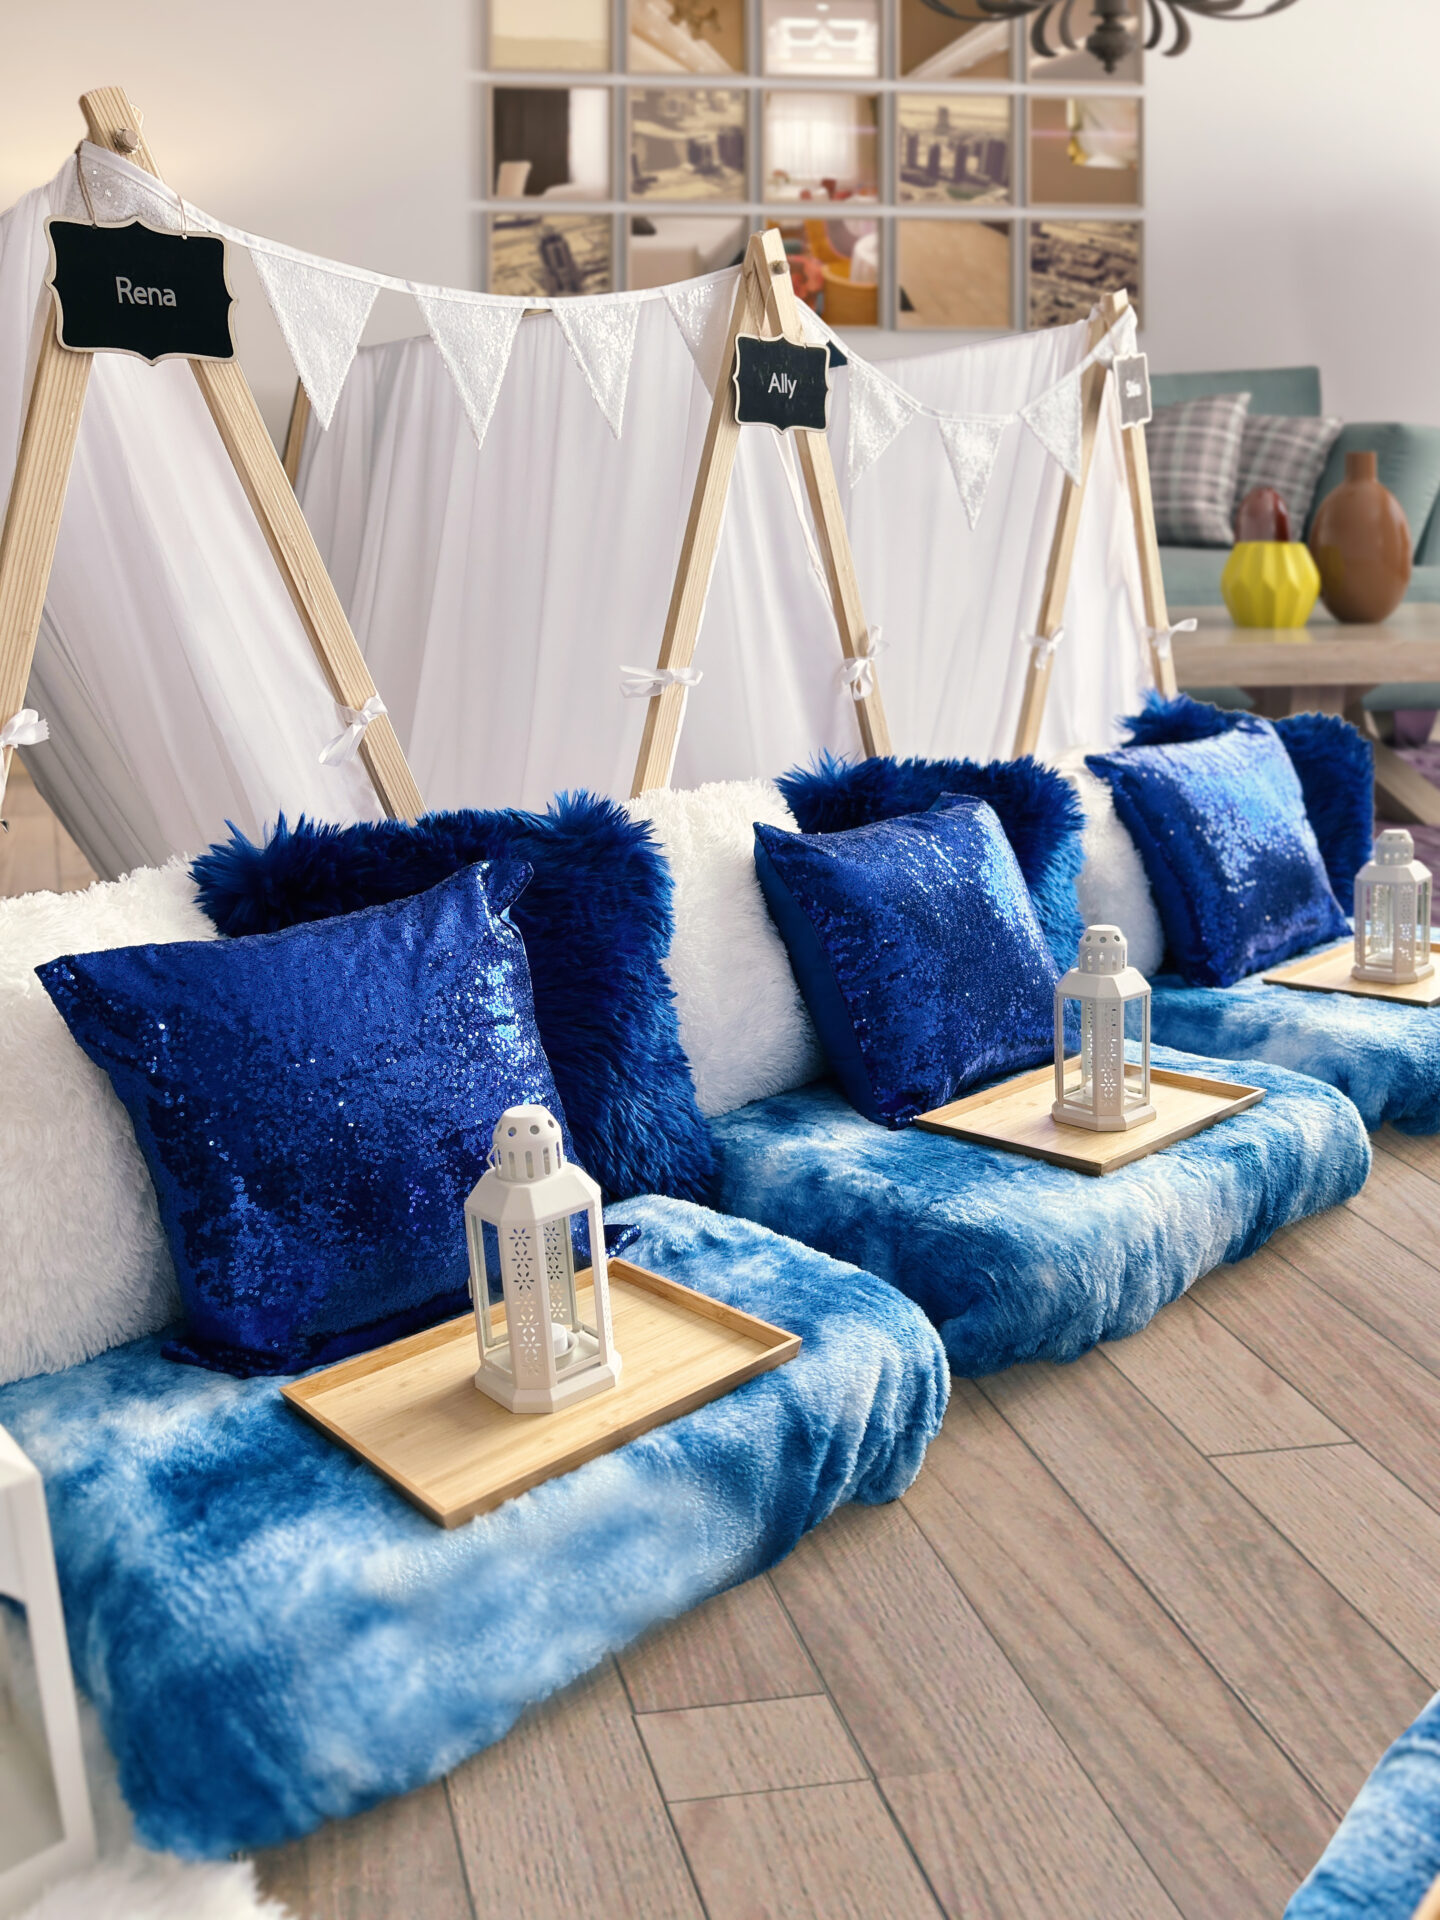 A row of blue pillows on top of white cushions.